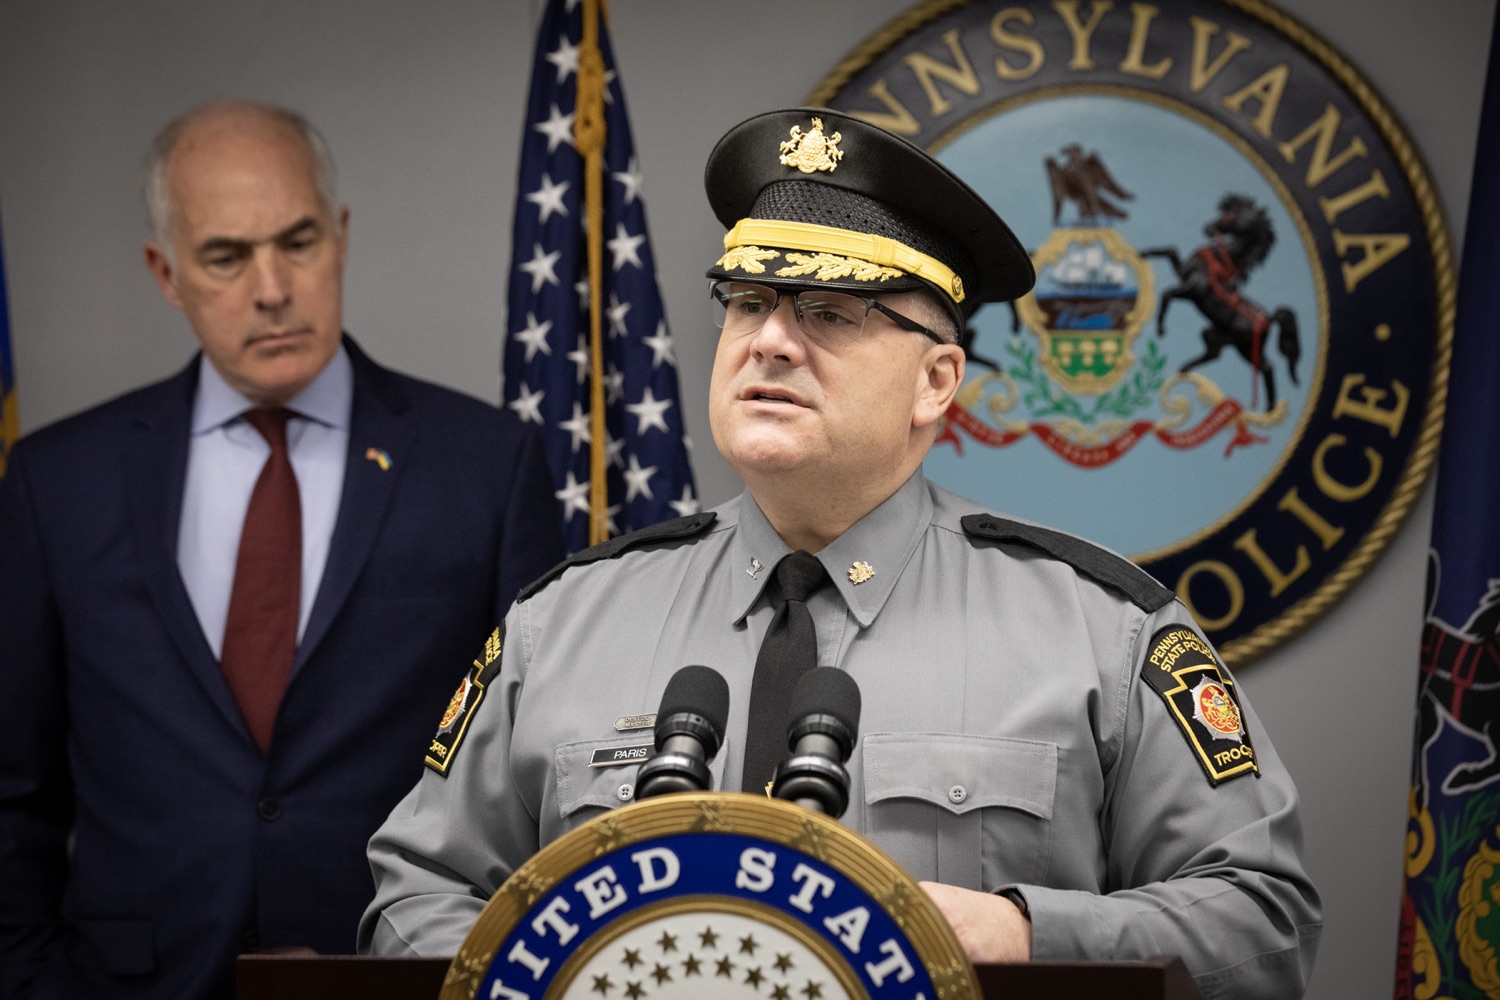 Senator Bob Casey visited Pennsylvania State Police Headquarters to discuss his proposed Stop Fentanyl at the Border Act. Pictured here is Harrisburg Colonel Paris delivering remarks during the event. Harrisburg, Pennsylvania.<br><a href="https://filesource.amperwave.net/commonwealthofpa/photo/24347_psp_stopFentanyl_JP_11.jpg" target="_blank">⇣ Download Photo</a>